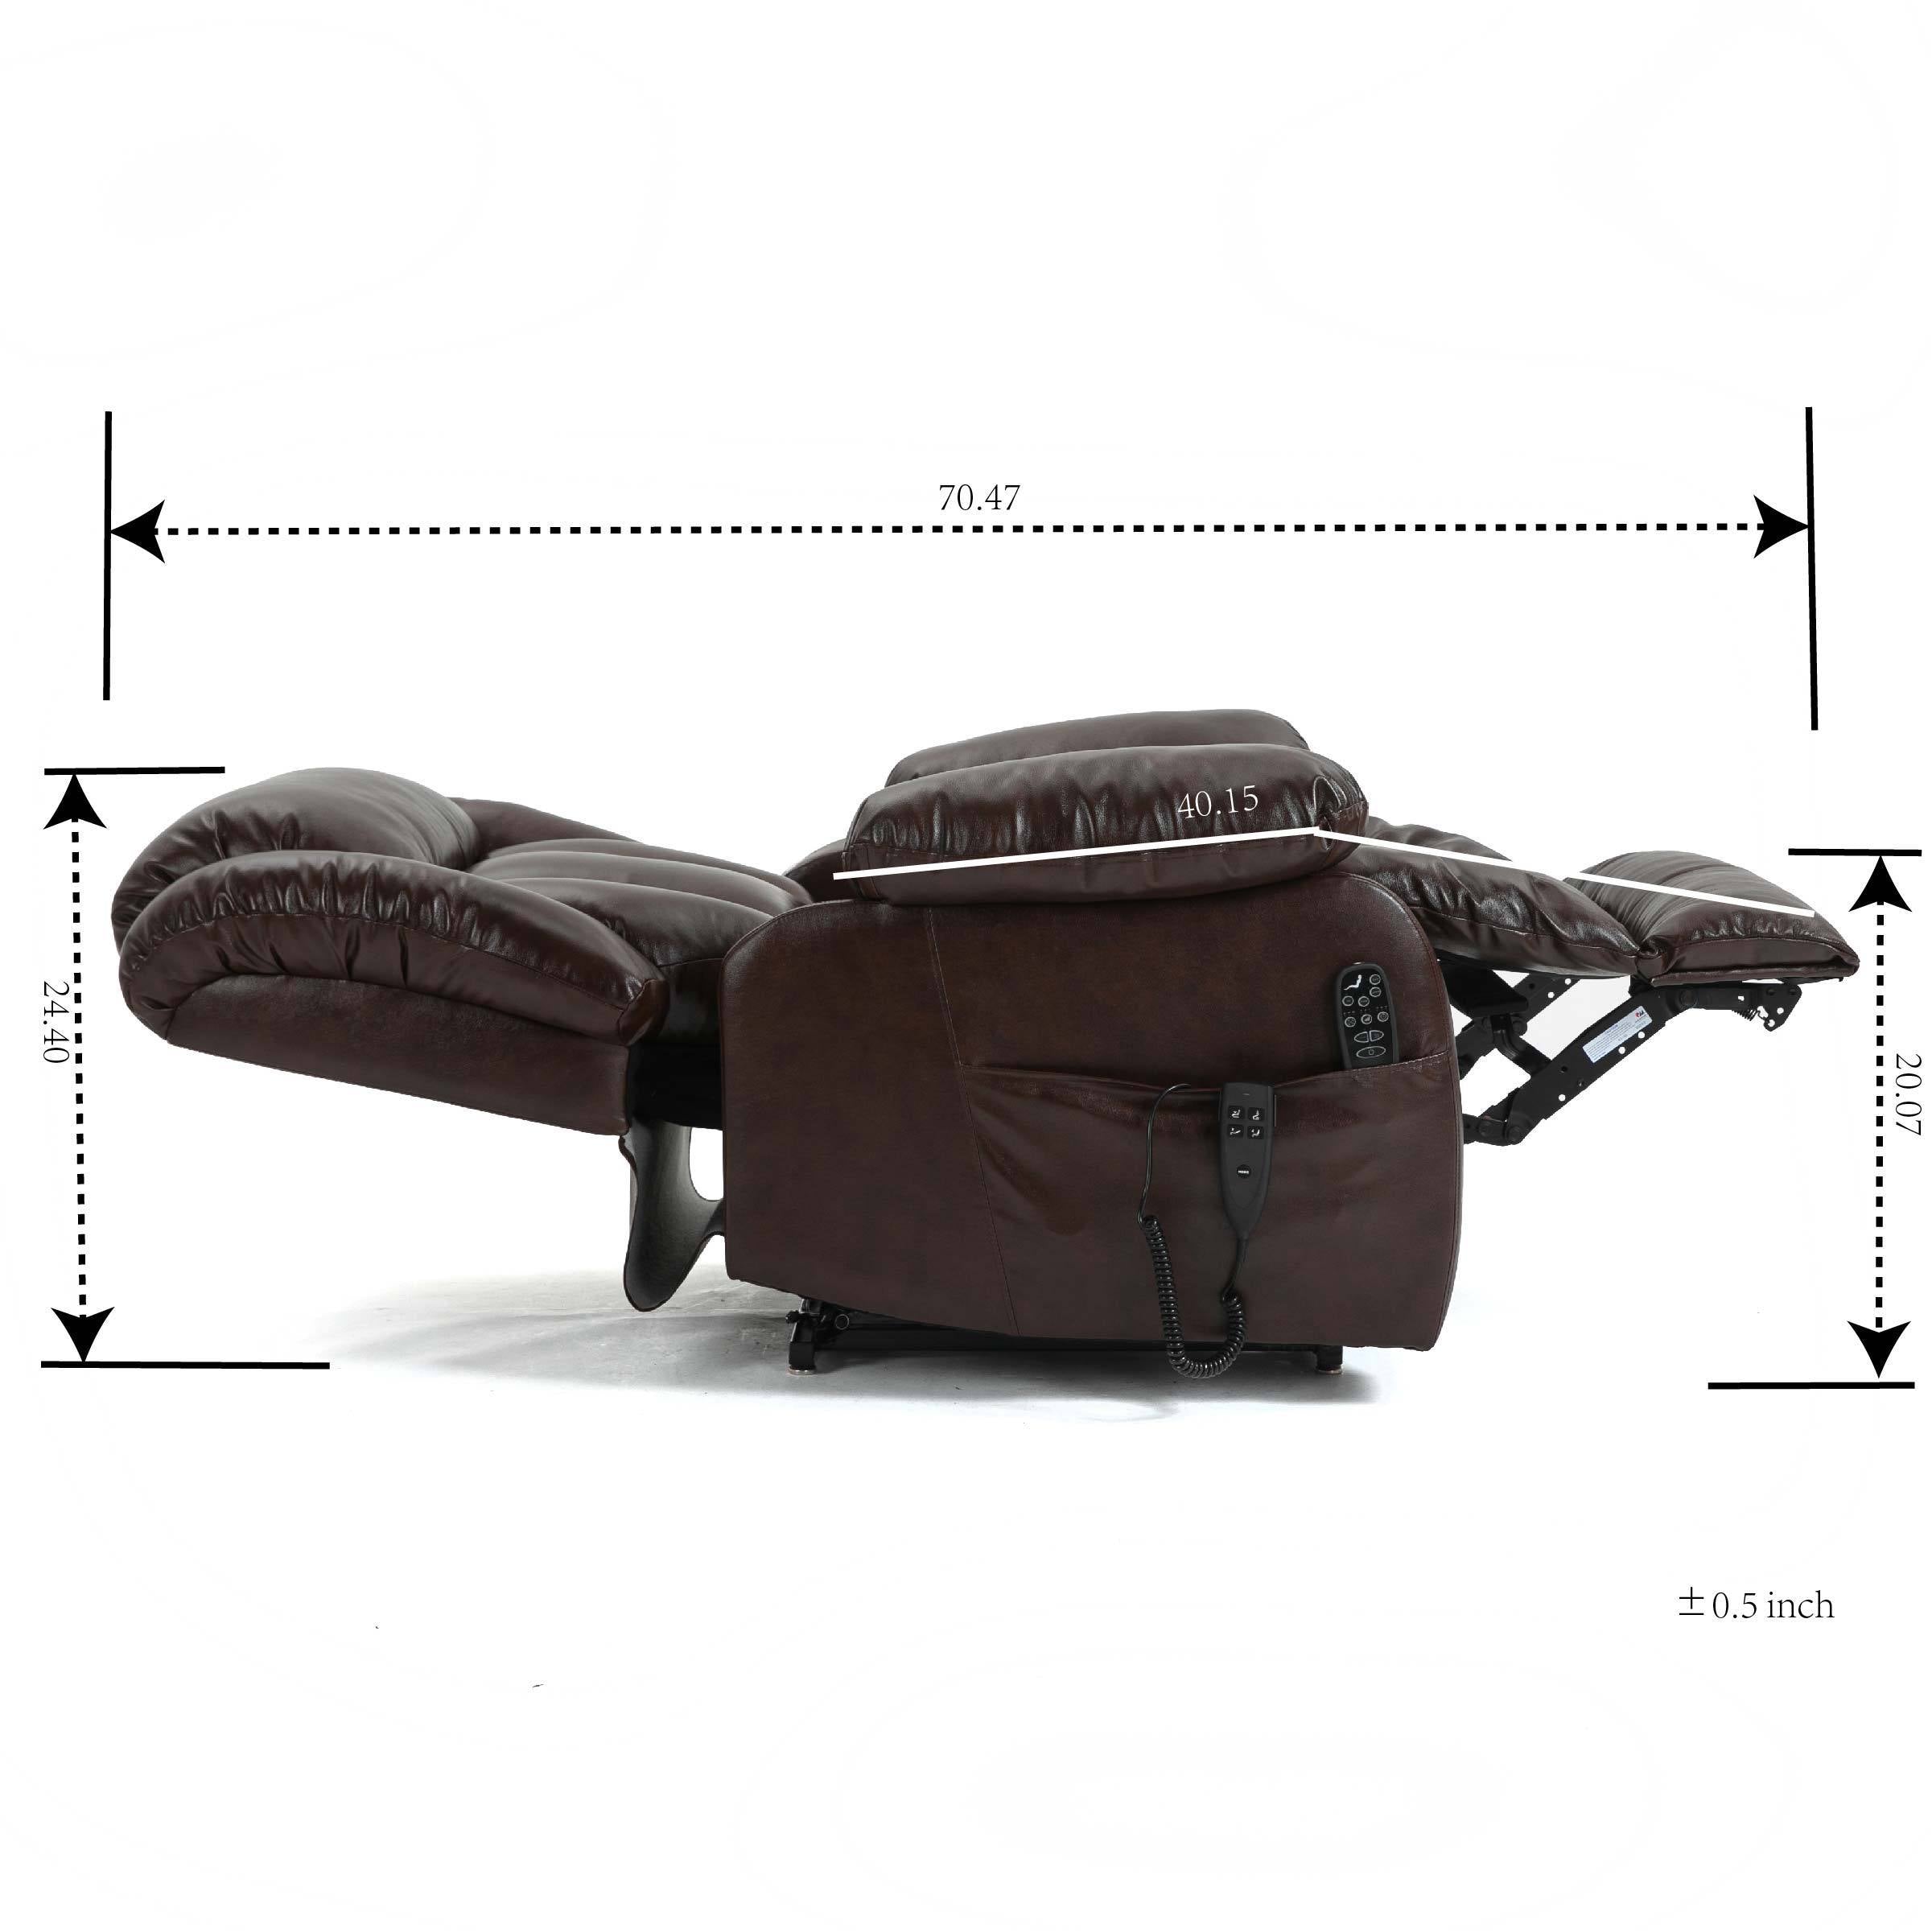 Brown Leather Power Lift Chair, sleep position, measurements